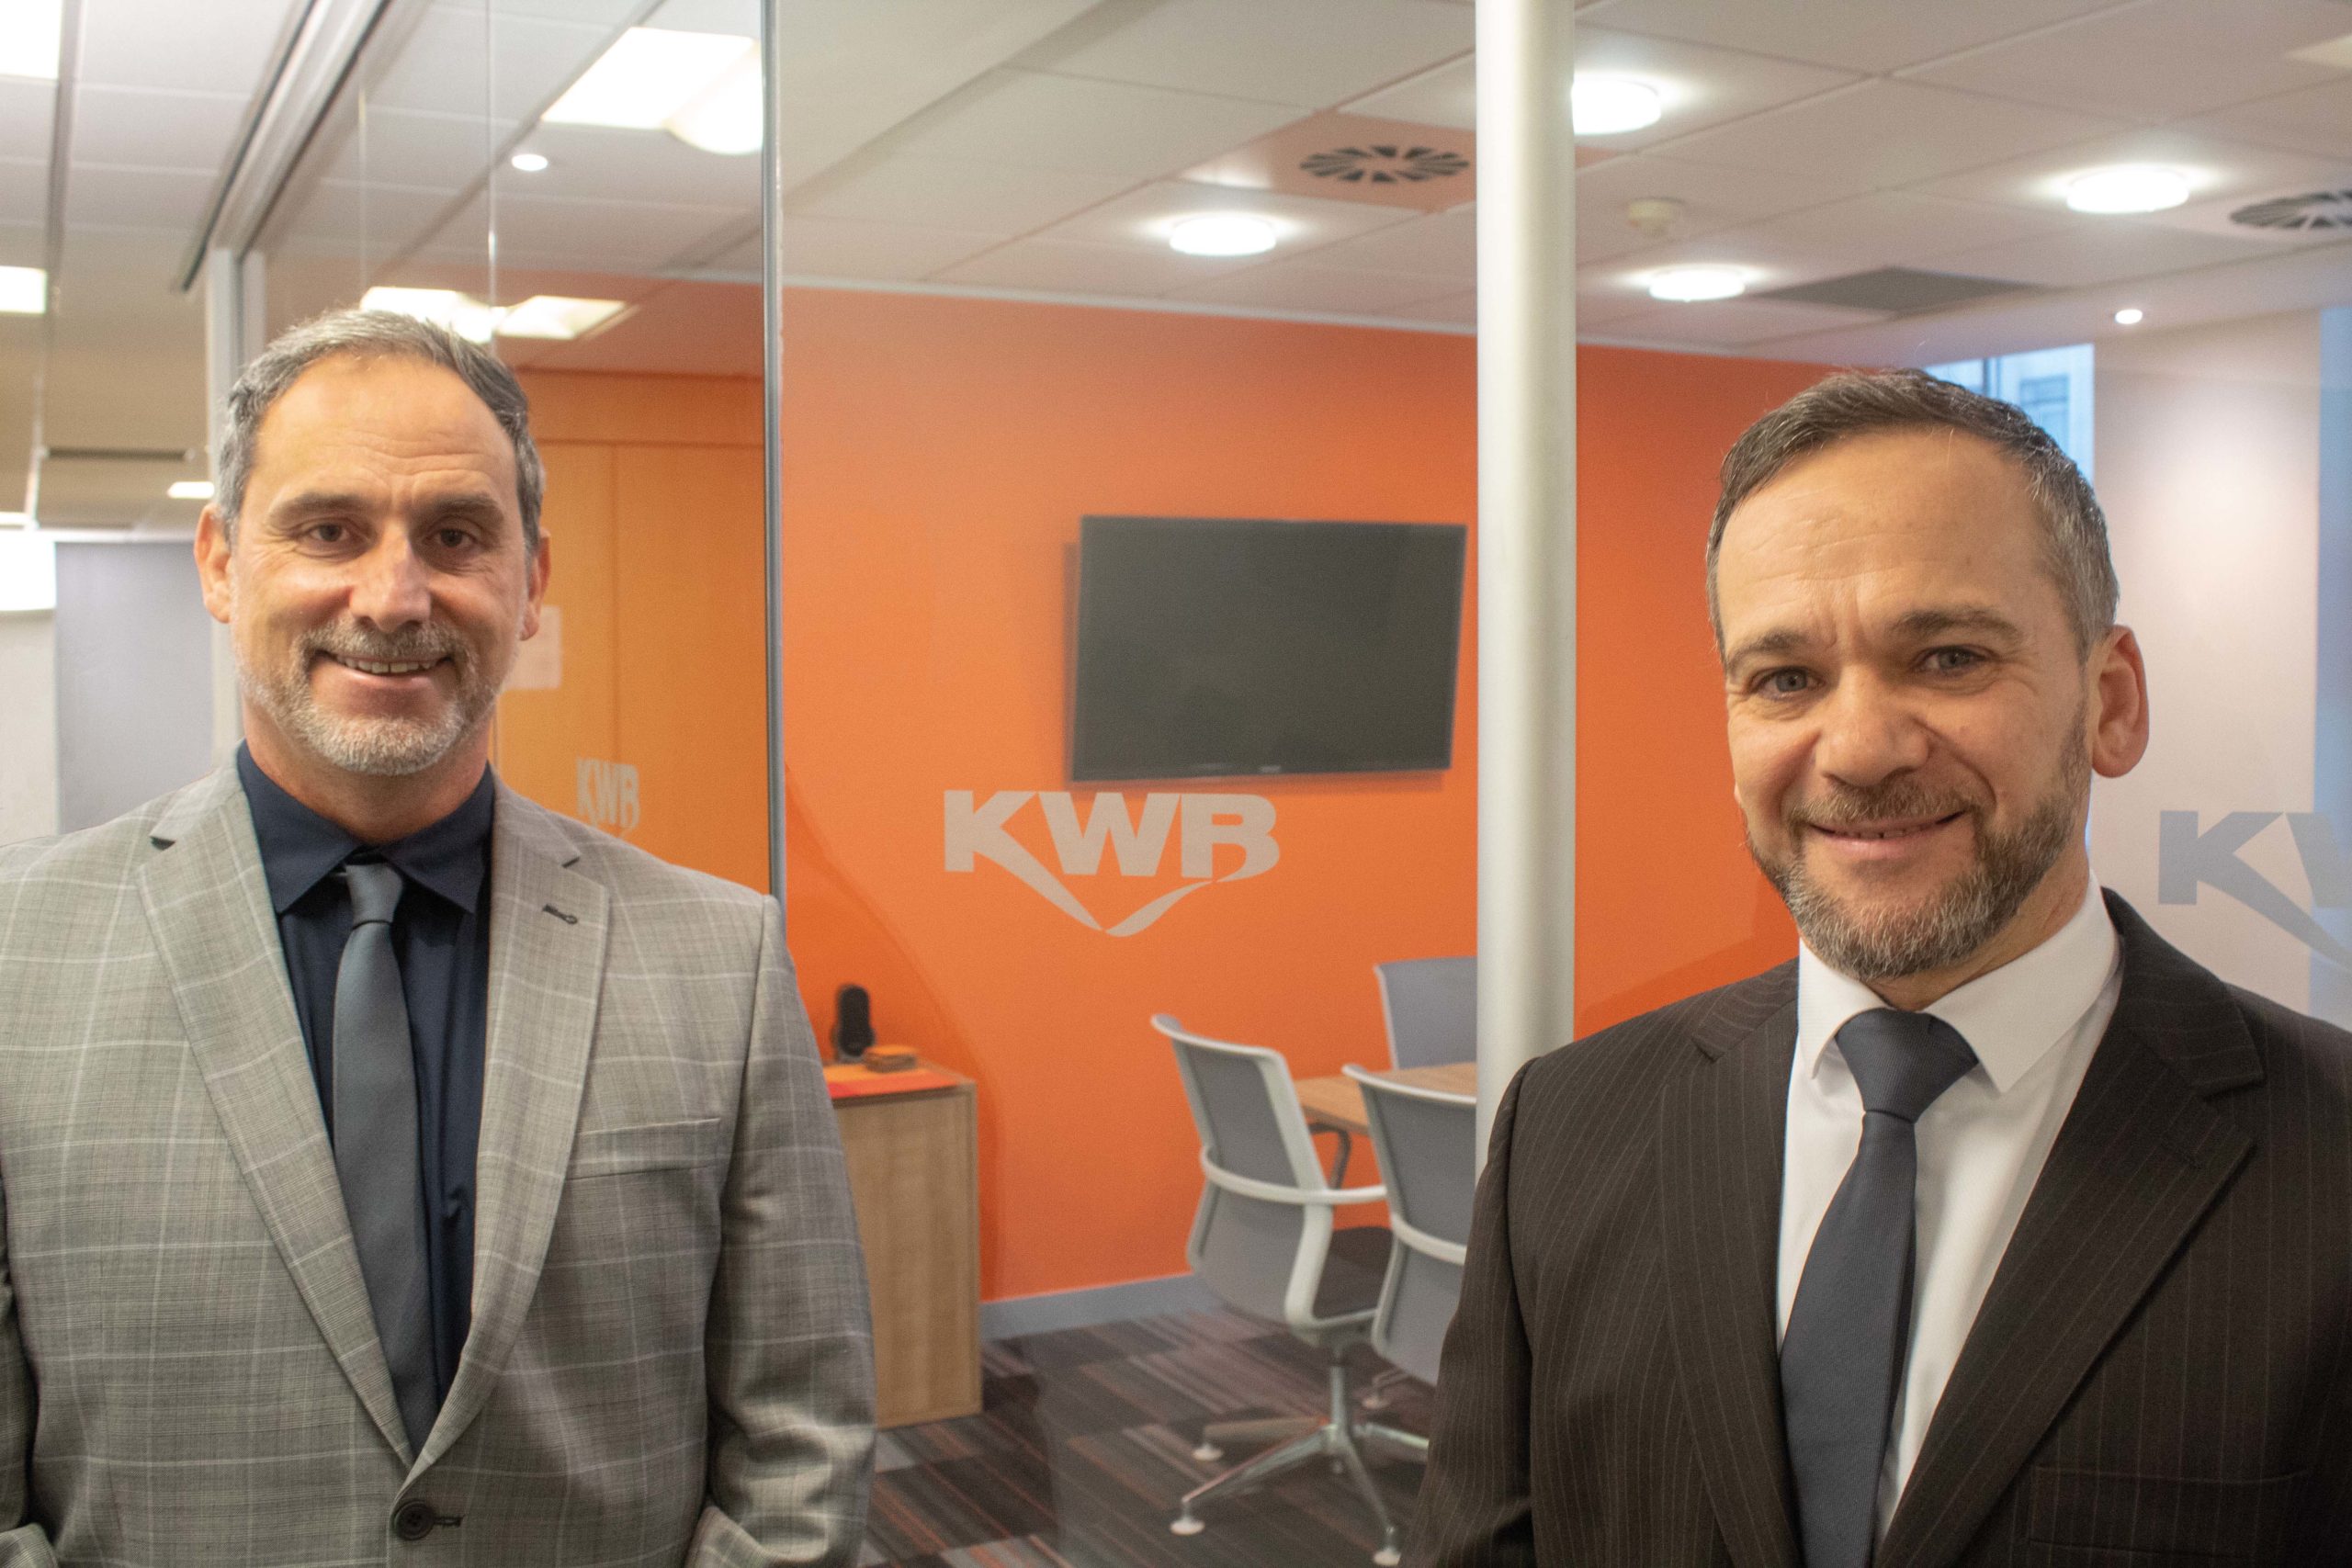 KWB Corporate Cleaning's Jim Duffy and Paul Winters